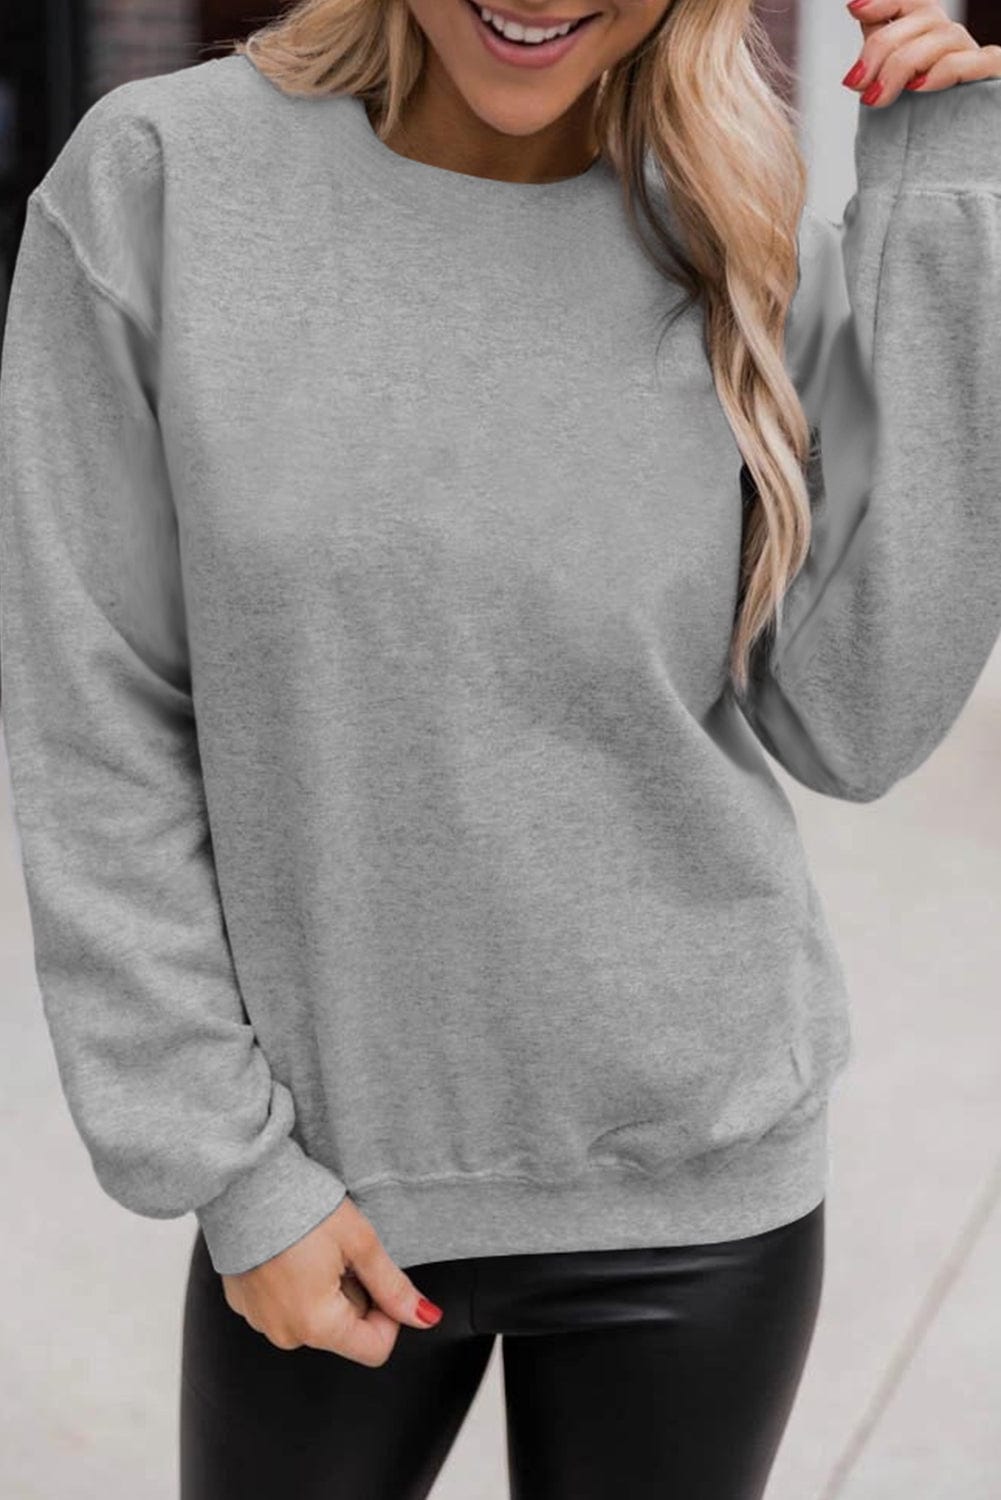 The802Gypsy  Tops Gray / S / 50%Polyester+50%Cotton Traveling Gypsy Classic Crewneck Pullover Sweatshirt